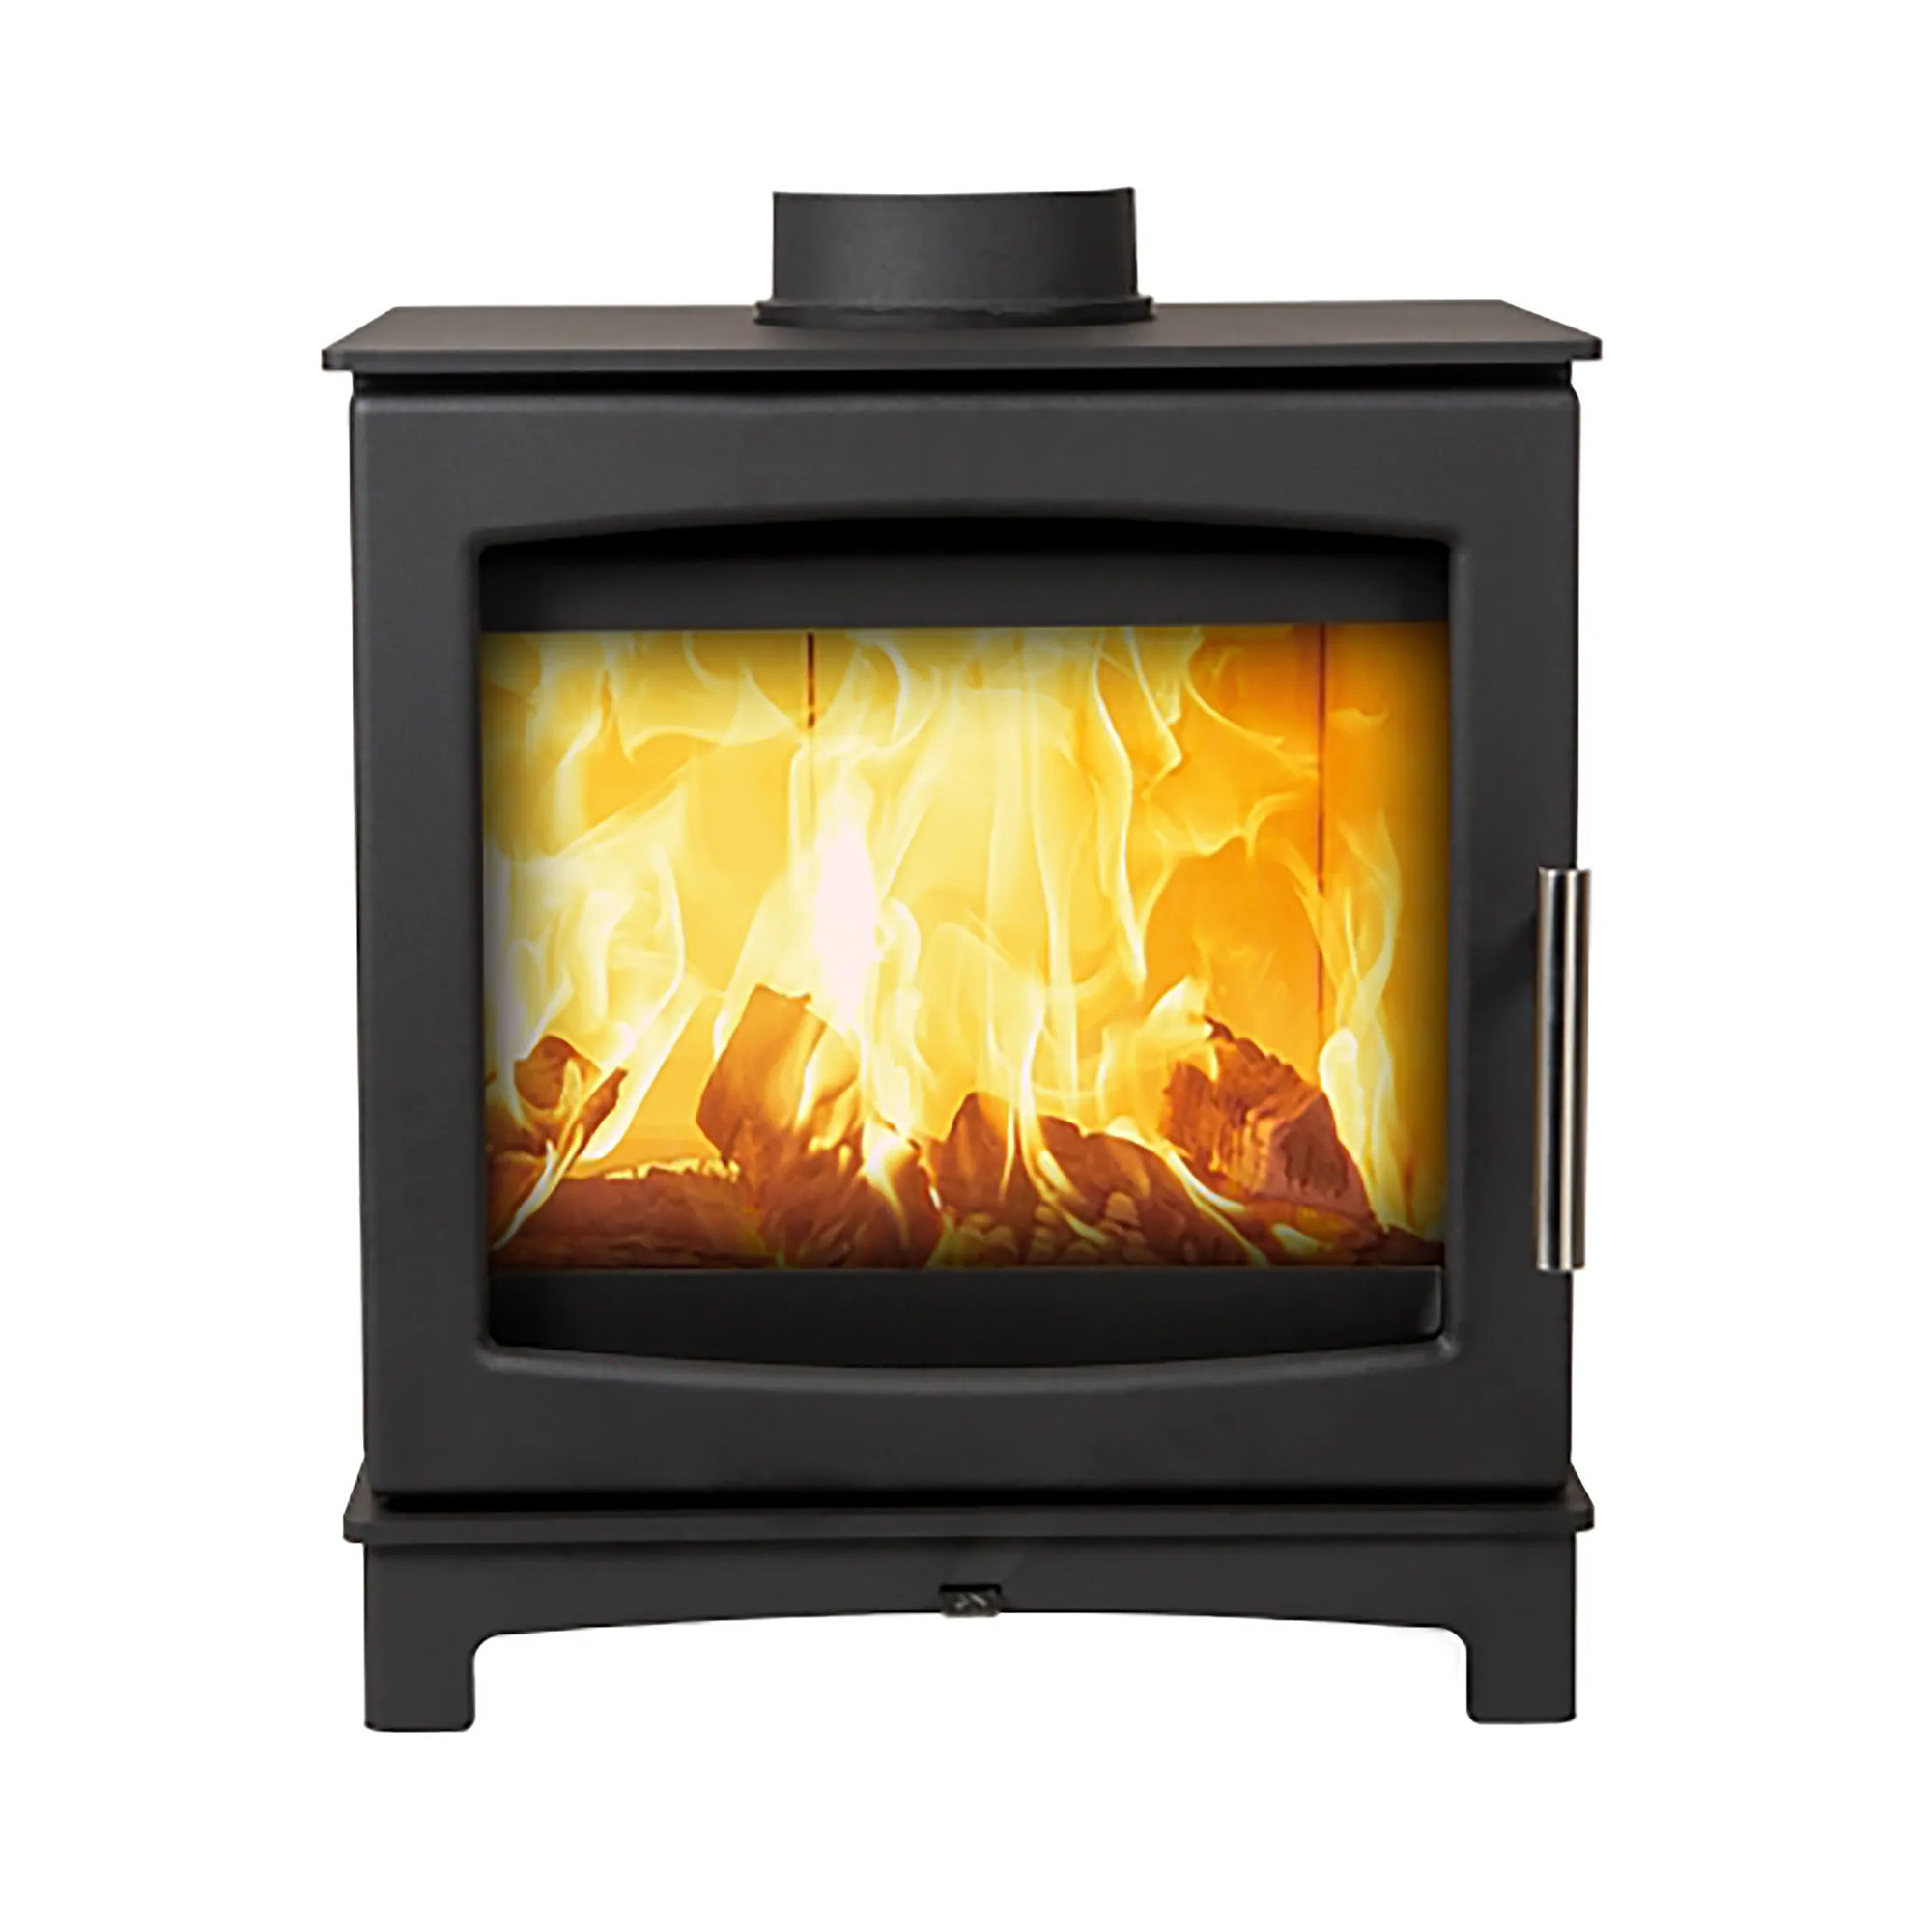 FlickrFLAME Small Wood Burning Stove 4.9kW - 139-S-FLICKRFL